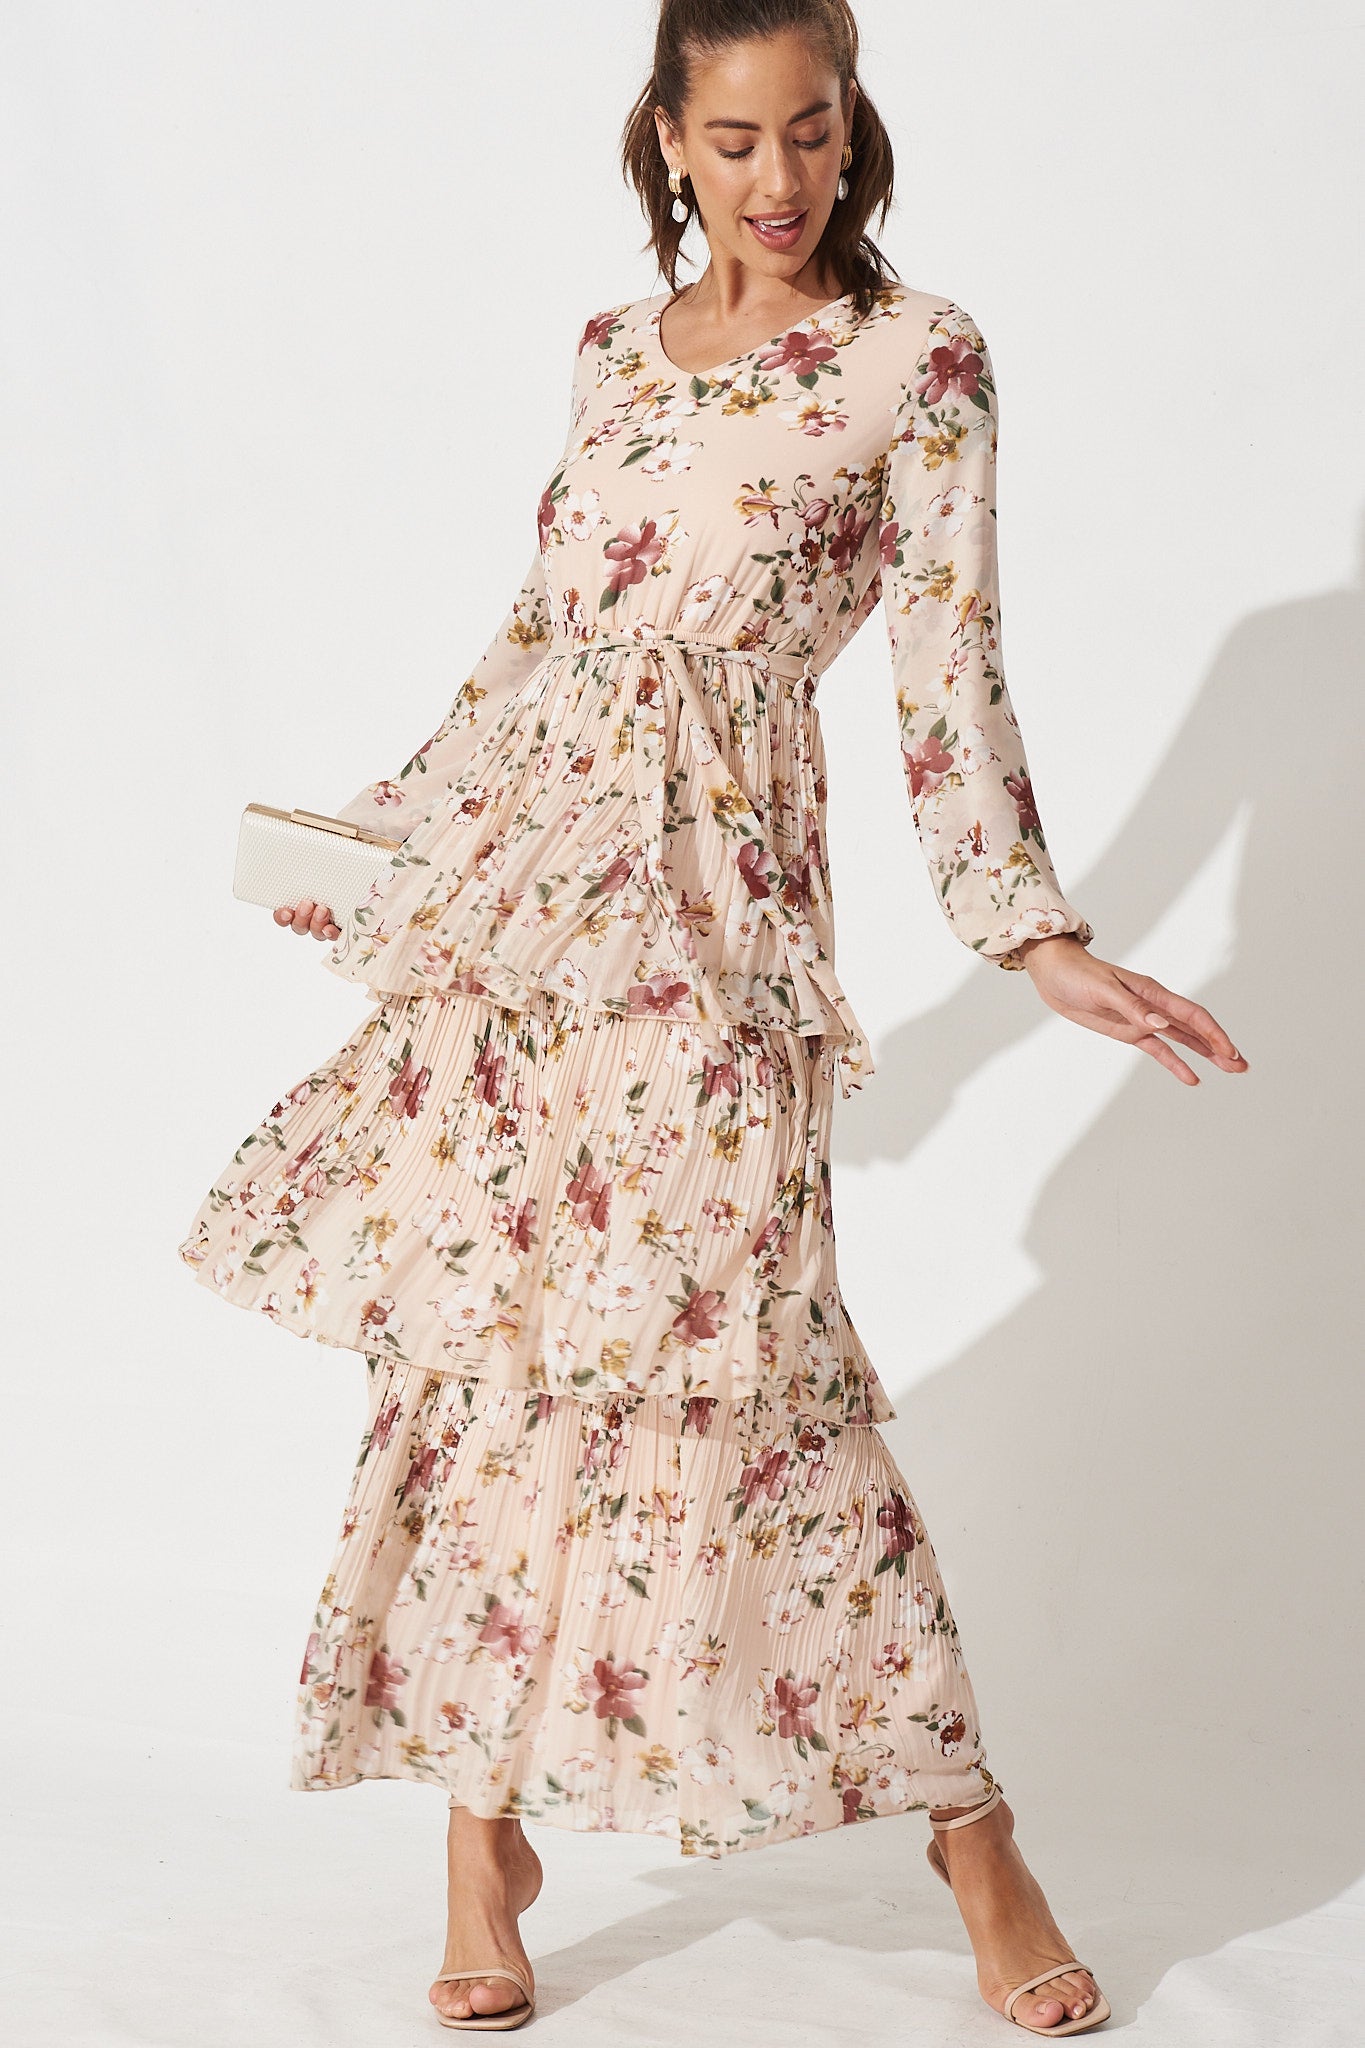 Shally Maxi Dress in Apricot Floral - Front